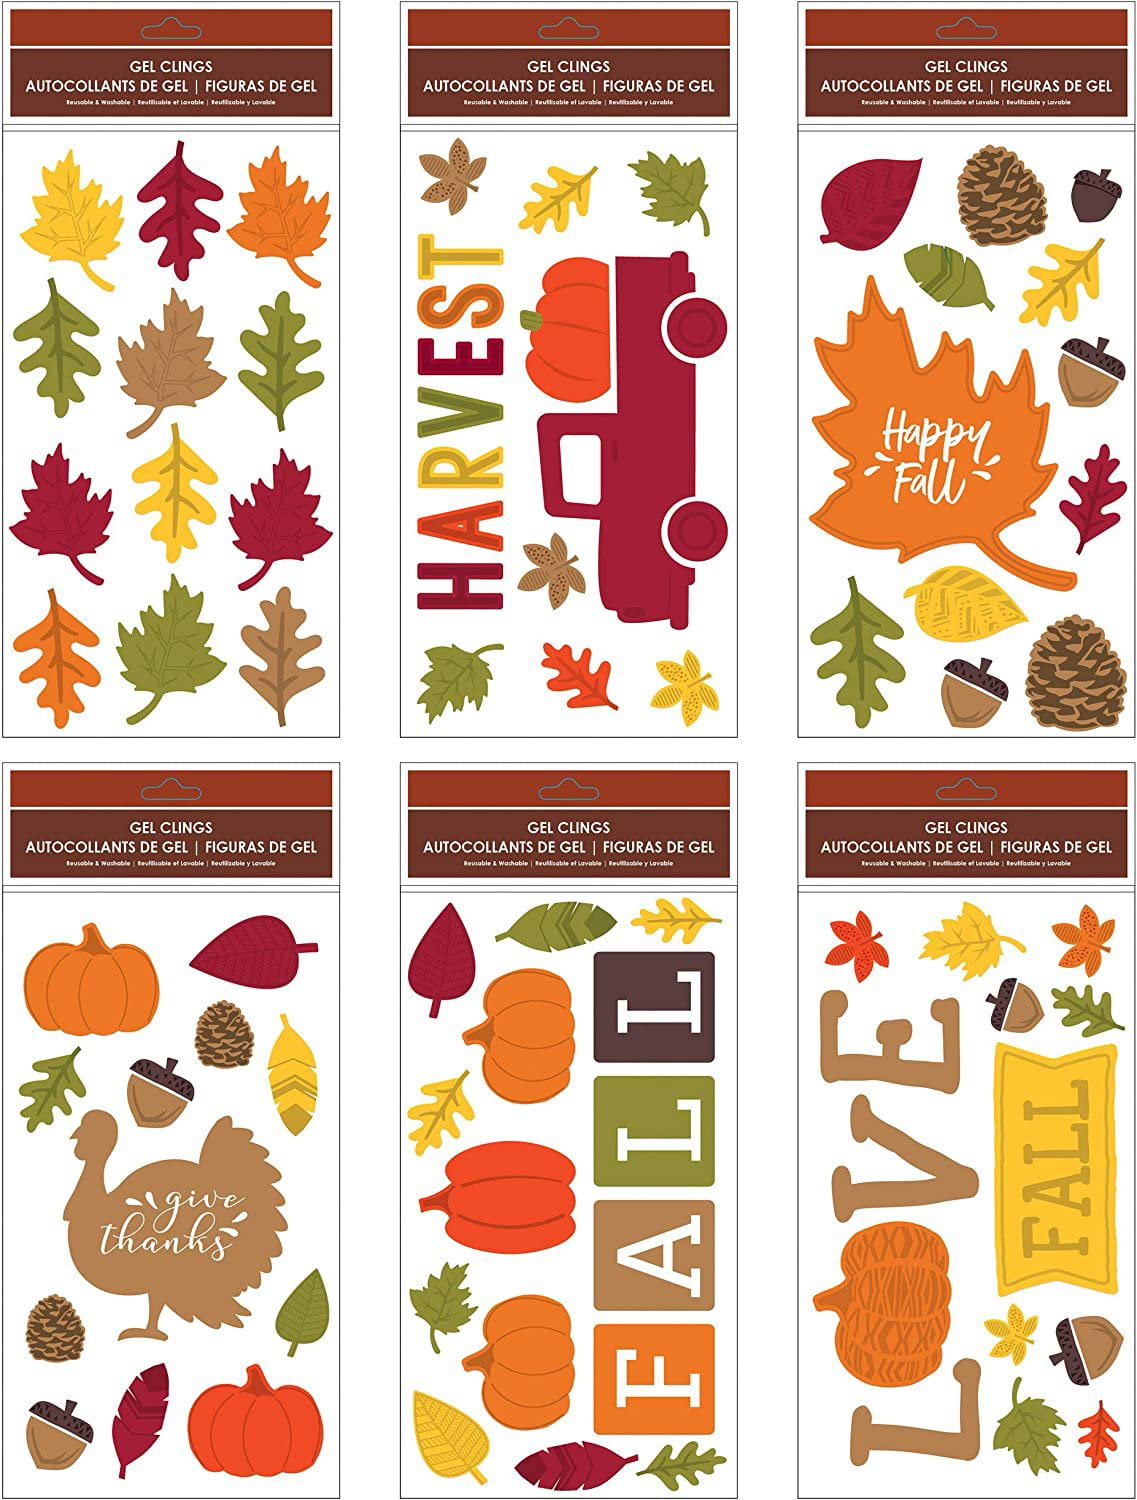 Details about   NEW Fall Autumn HAPPY TURKEY DAY Thanksgiving Leaves 26 pc Window Gel Clings! 